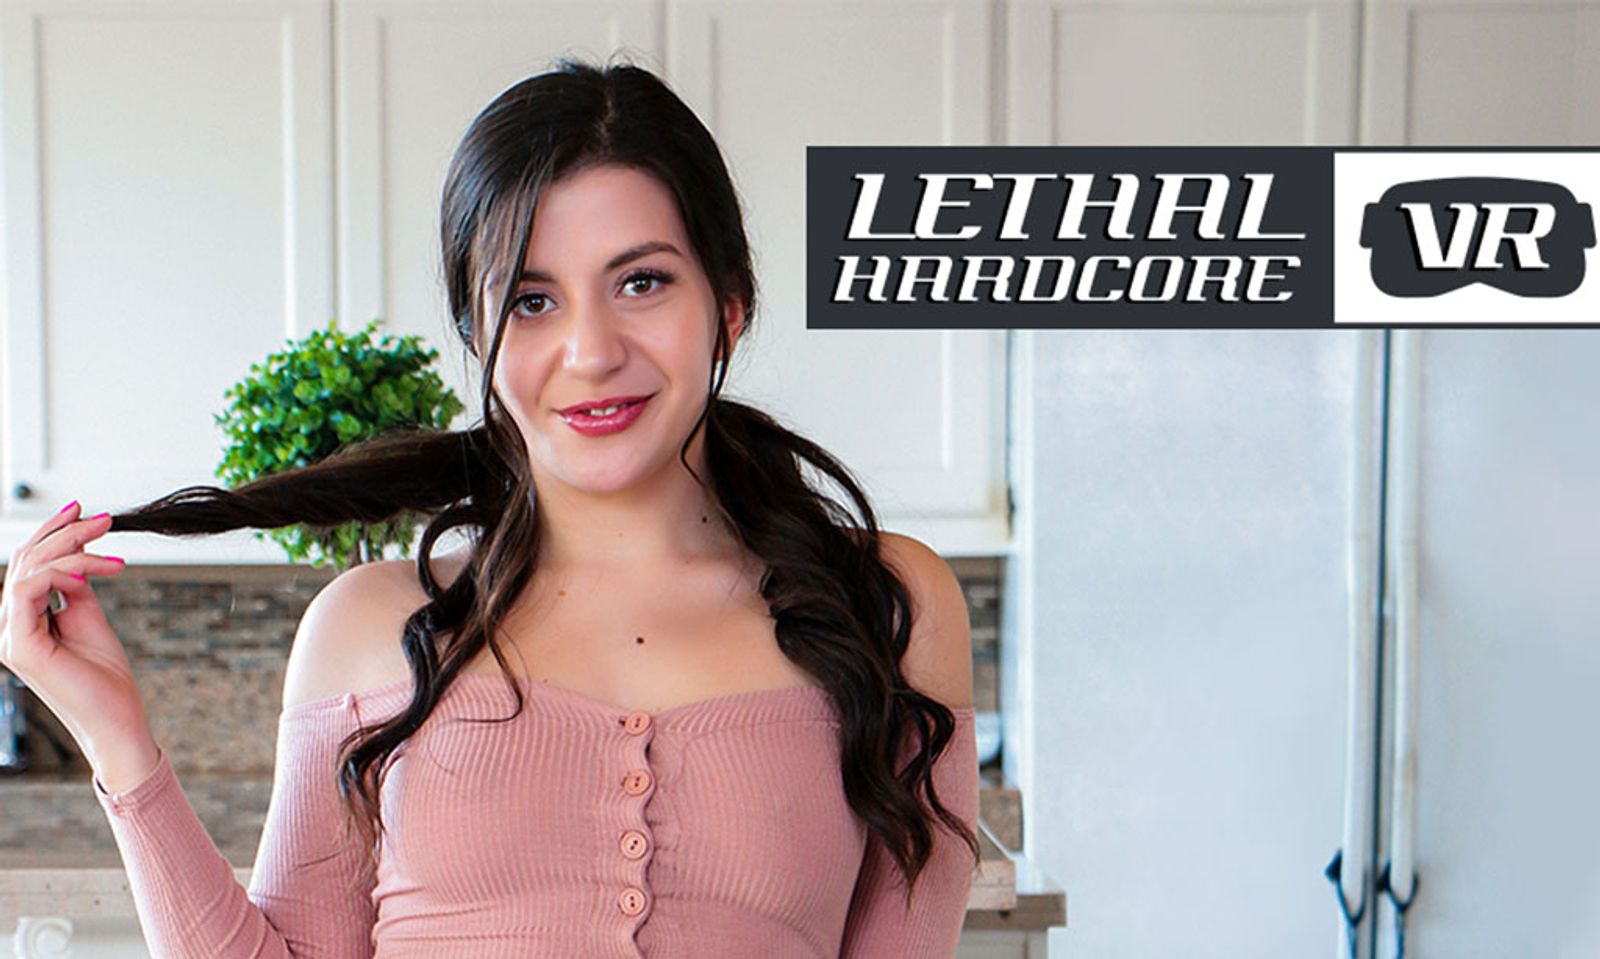 Lethal Hardcore VR Offers Natalie Brooks As Sexy Naughty Neighbor